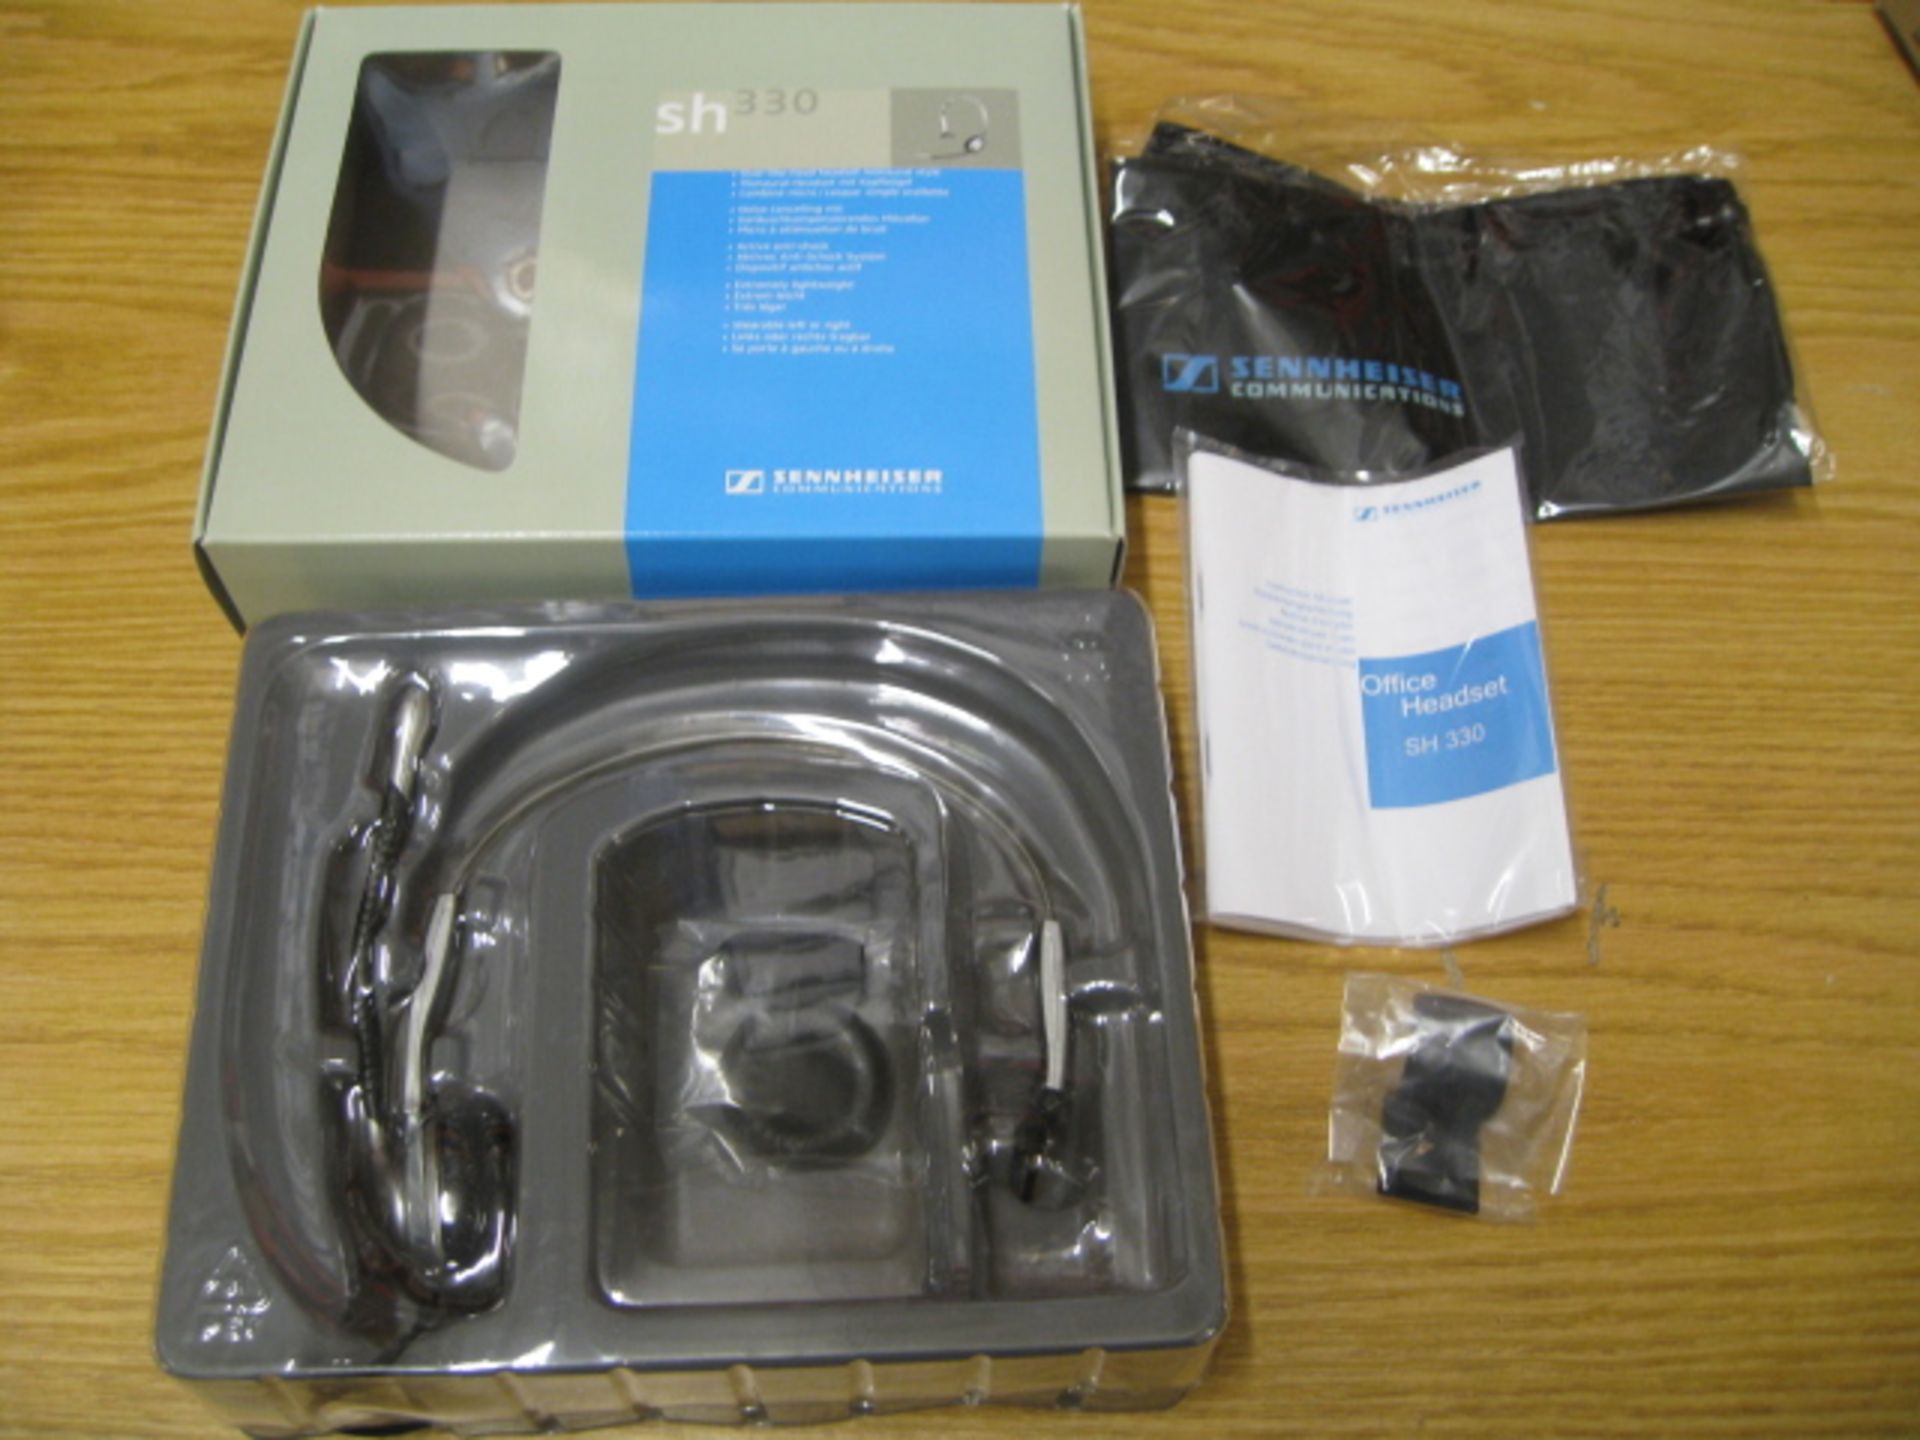 SENNHEISER SH 330 OVER THE HEAD HEADSET MONAURAL STYLE. NOISE CANCELLING MICROPHONE. BRAND NEW &